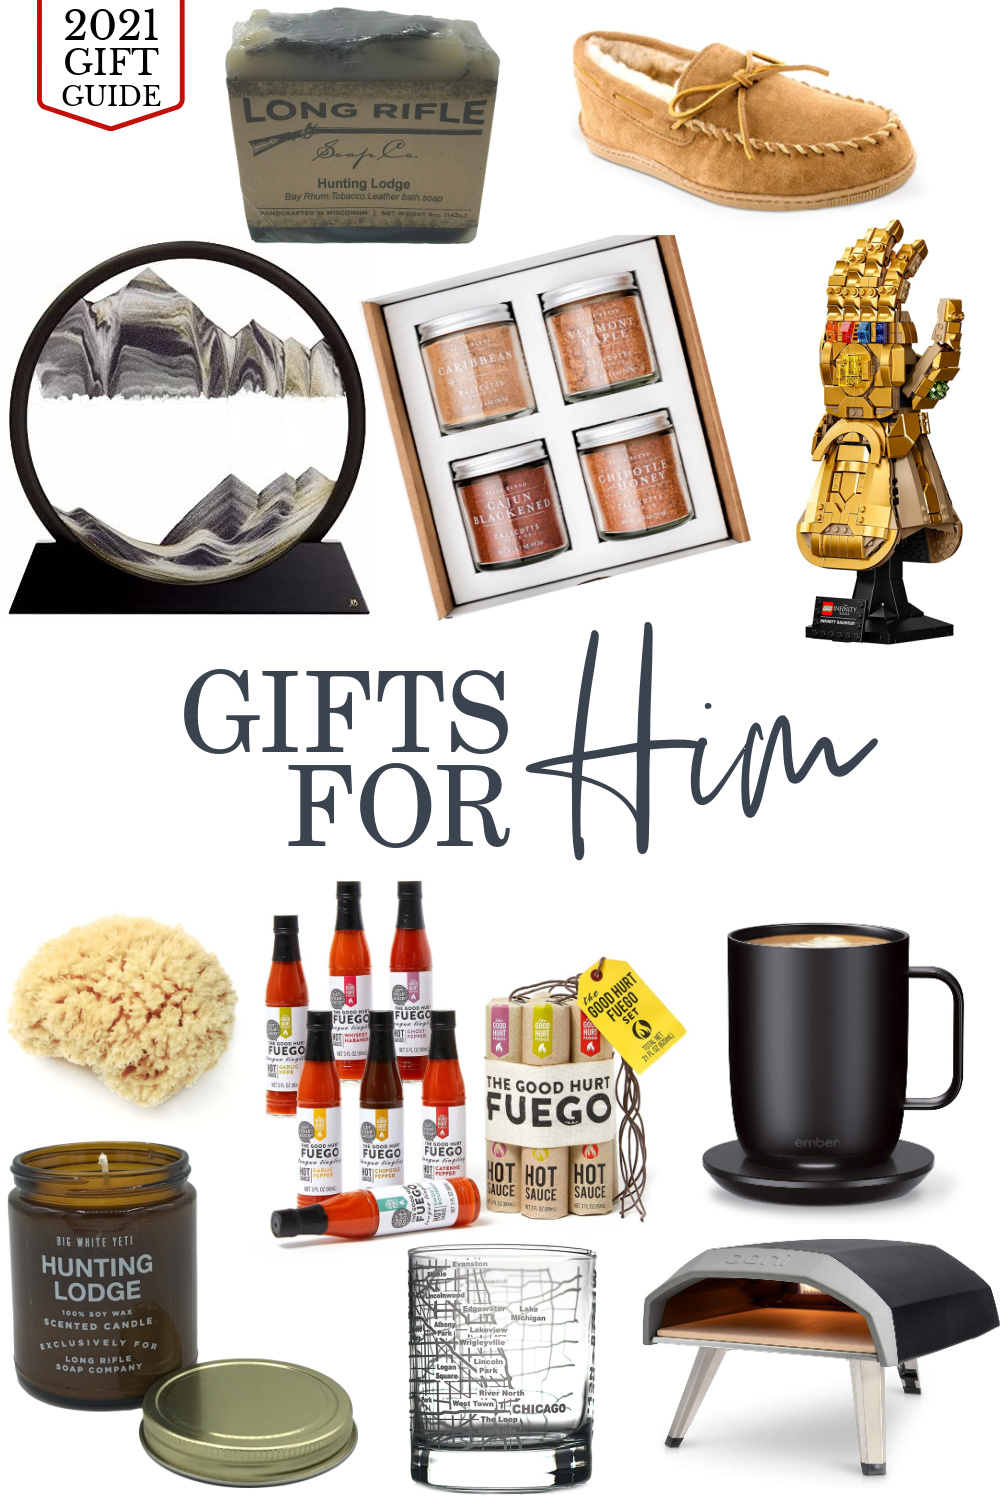 Give the best gifts for men in 2021! Check out this list of unique gifts and hot trends, and find great gift ideas for him